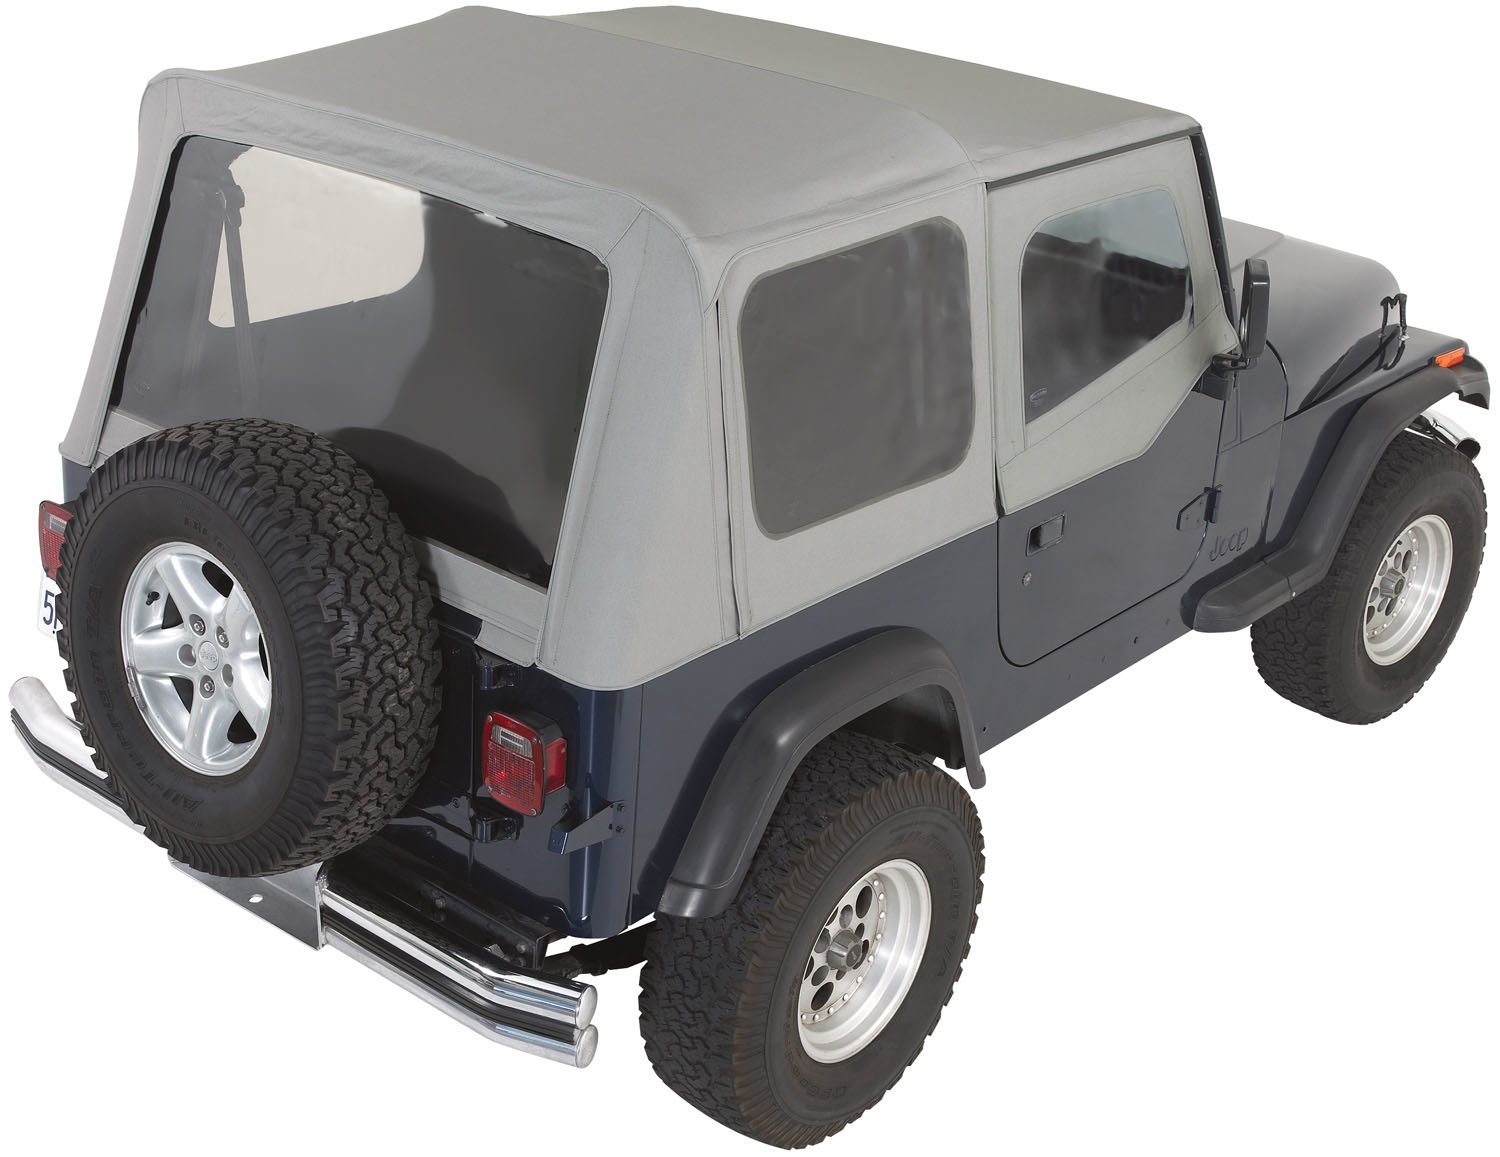 Top Interior Accessories for the Jeep Wrangler YJ